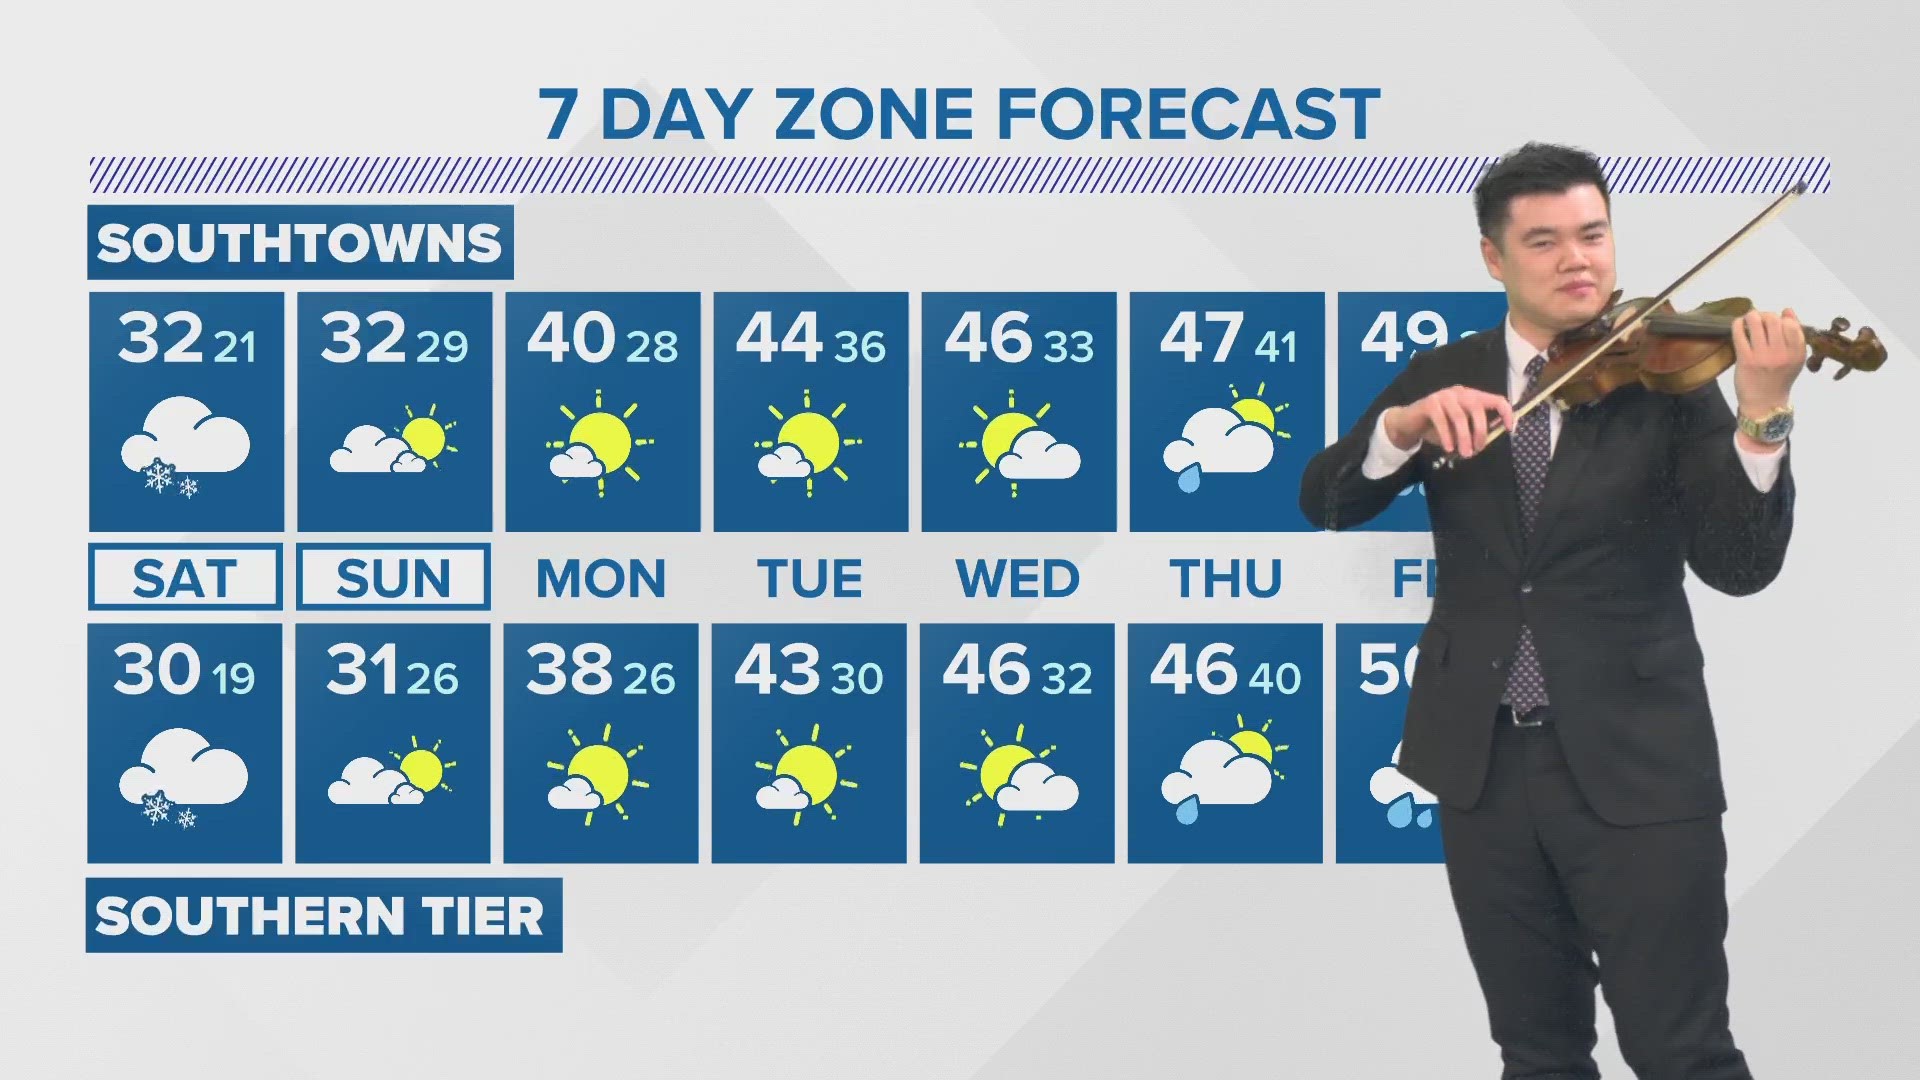 Storm Team 2's Carl Lam plays an Irish jig to end the Friday night forecast